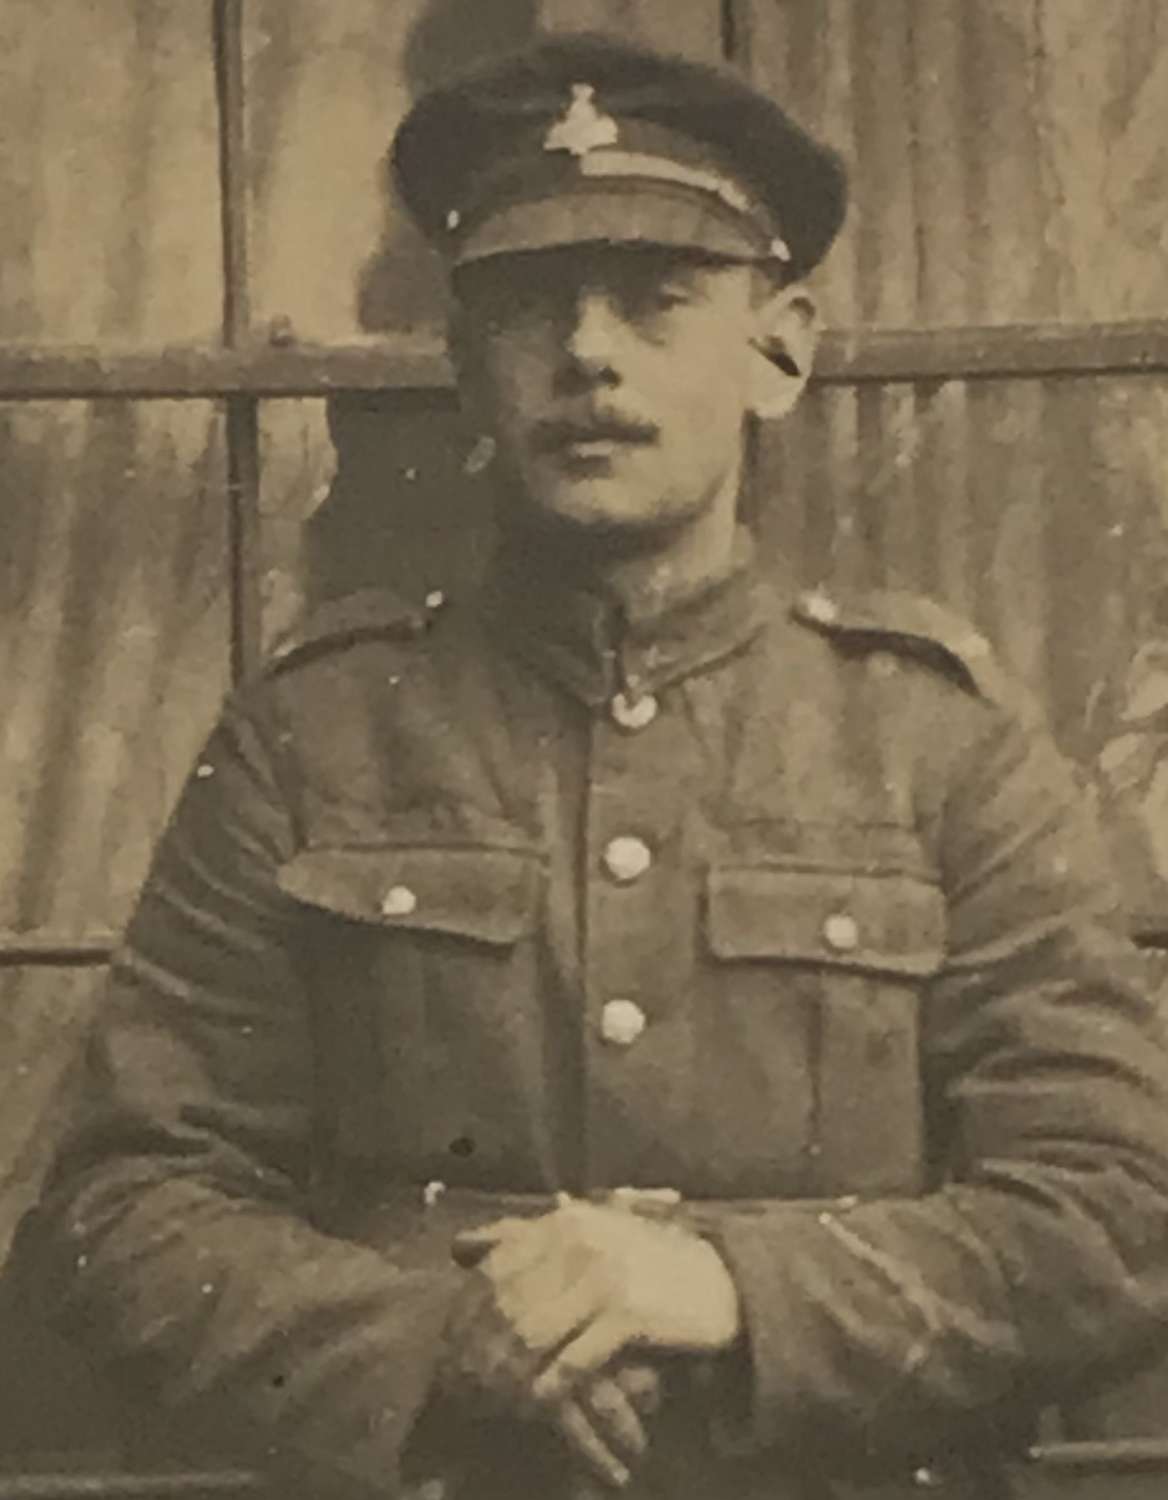 A photo of First World War, British Tommy with Lee Enfield rifle